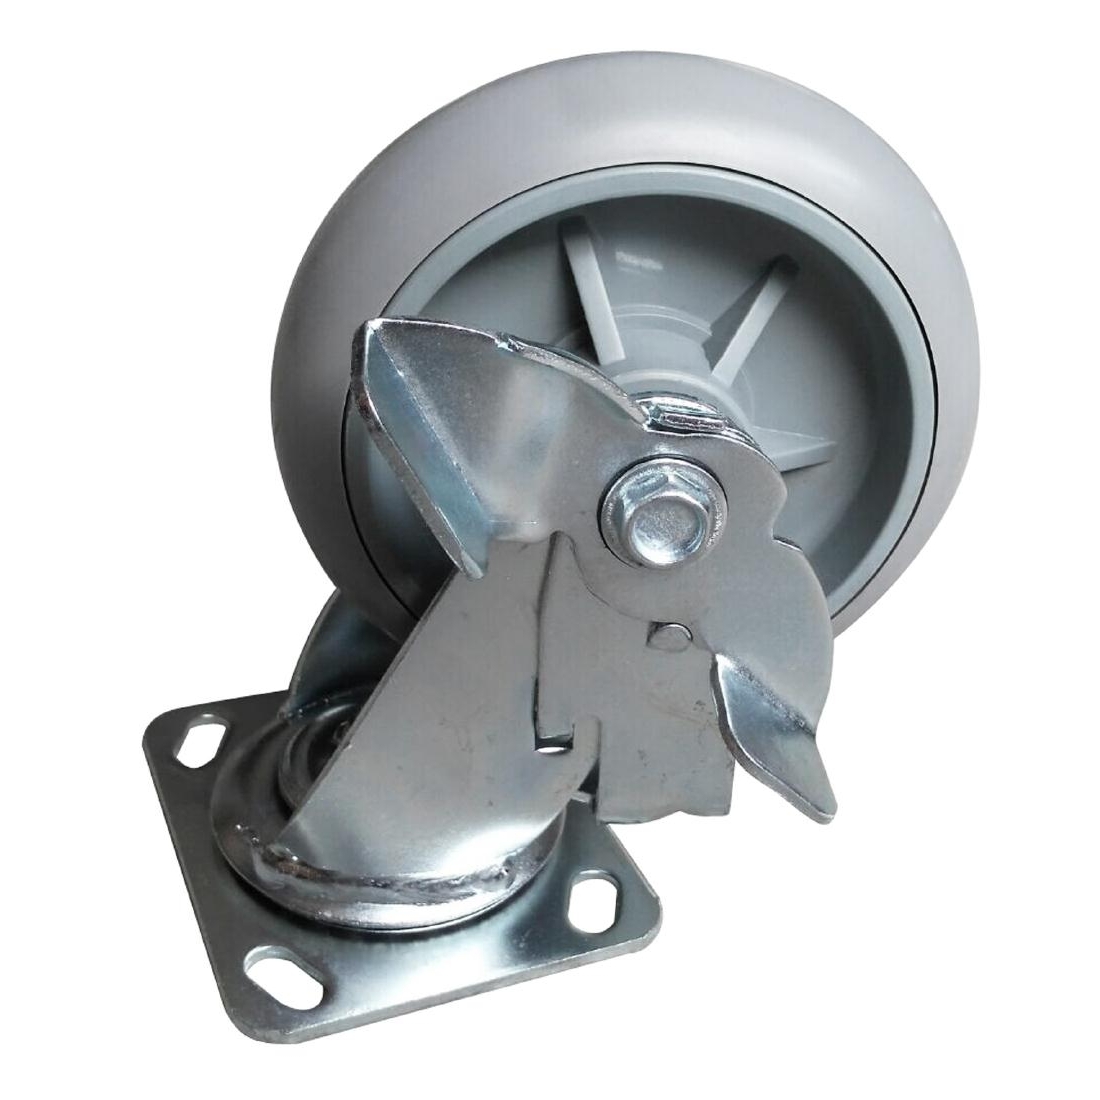 Jantex Spare Braked Castors for Housekeeping Trolley